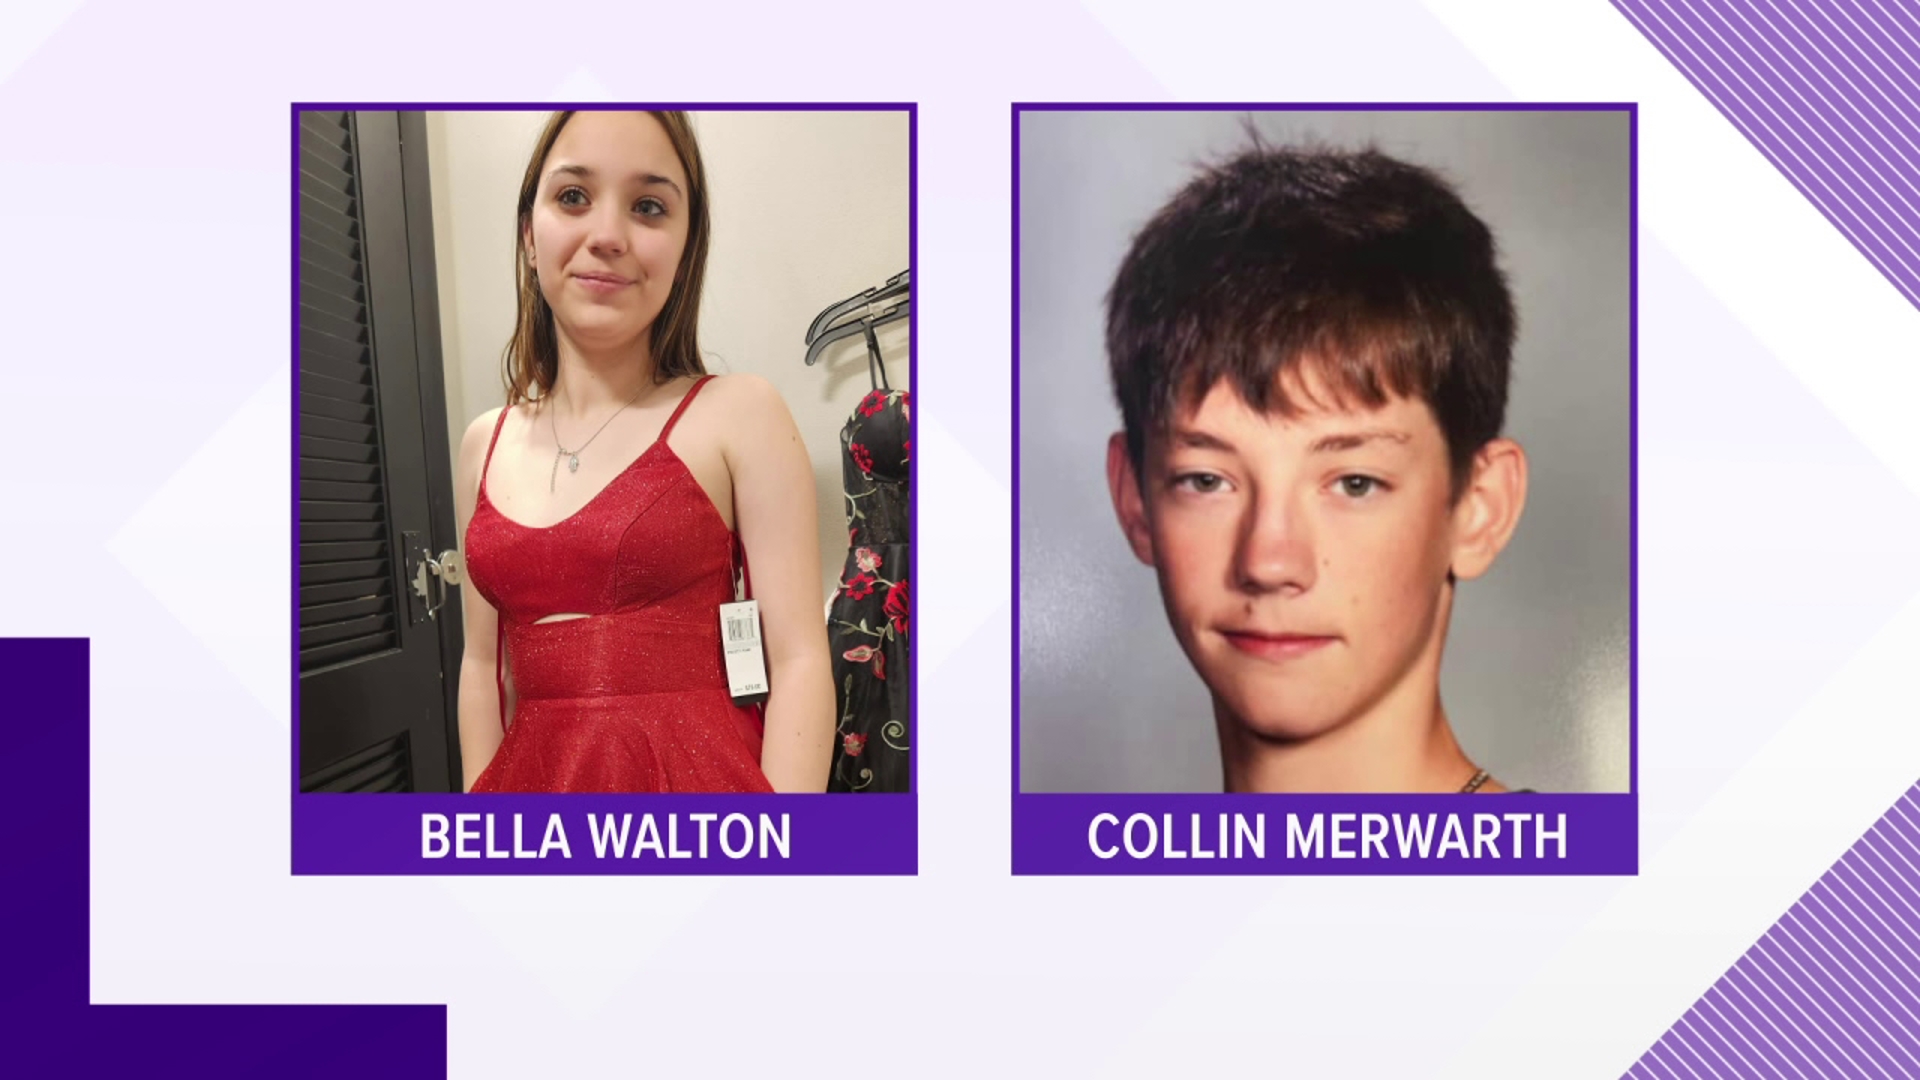 Police are searching for Bella Walton, an insulin-dependent teenager who was reported missing from Luzerne County on Saturday.